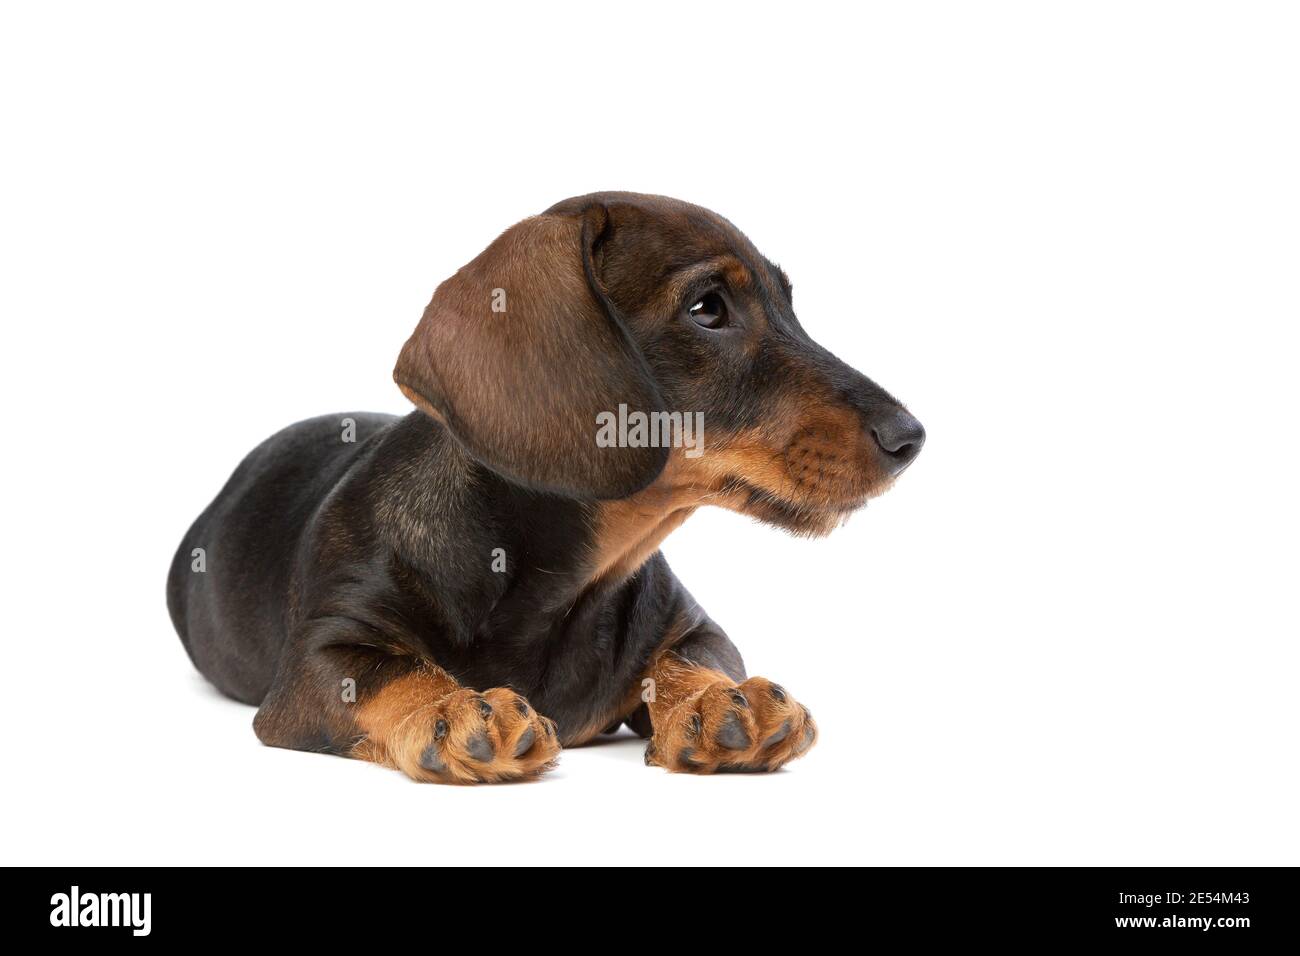 black and tan wire haired dachshund puppy in front of a white background Stock Photo